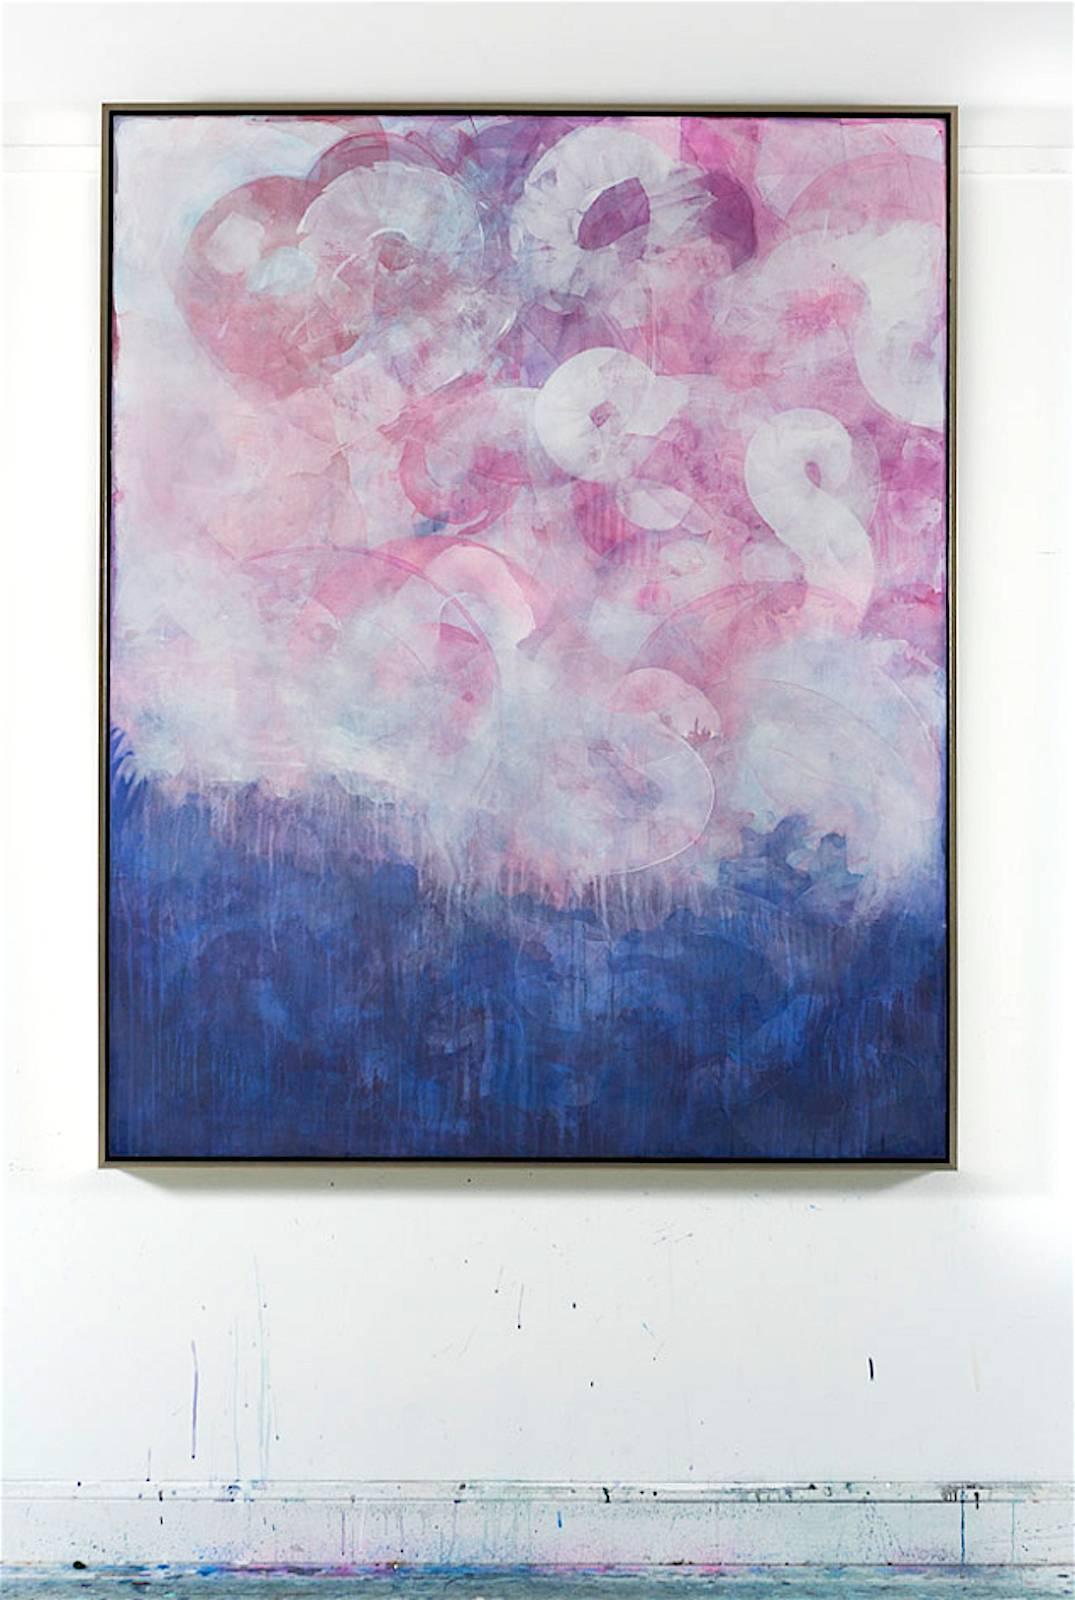 A large abstract landscape in vibrant pink and purple hues by Virginia artist Abby Kasonik. The work is framed nicely in a black and warm silver gilt topped gallery 